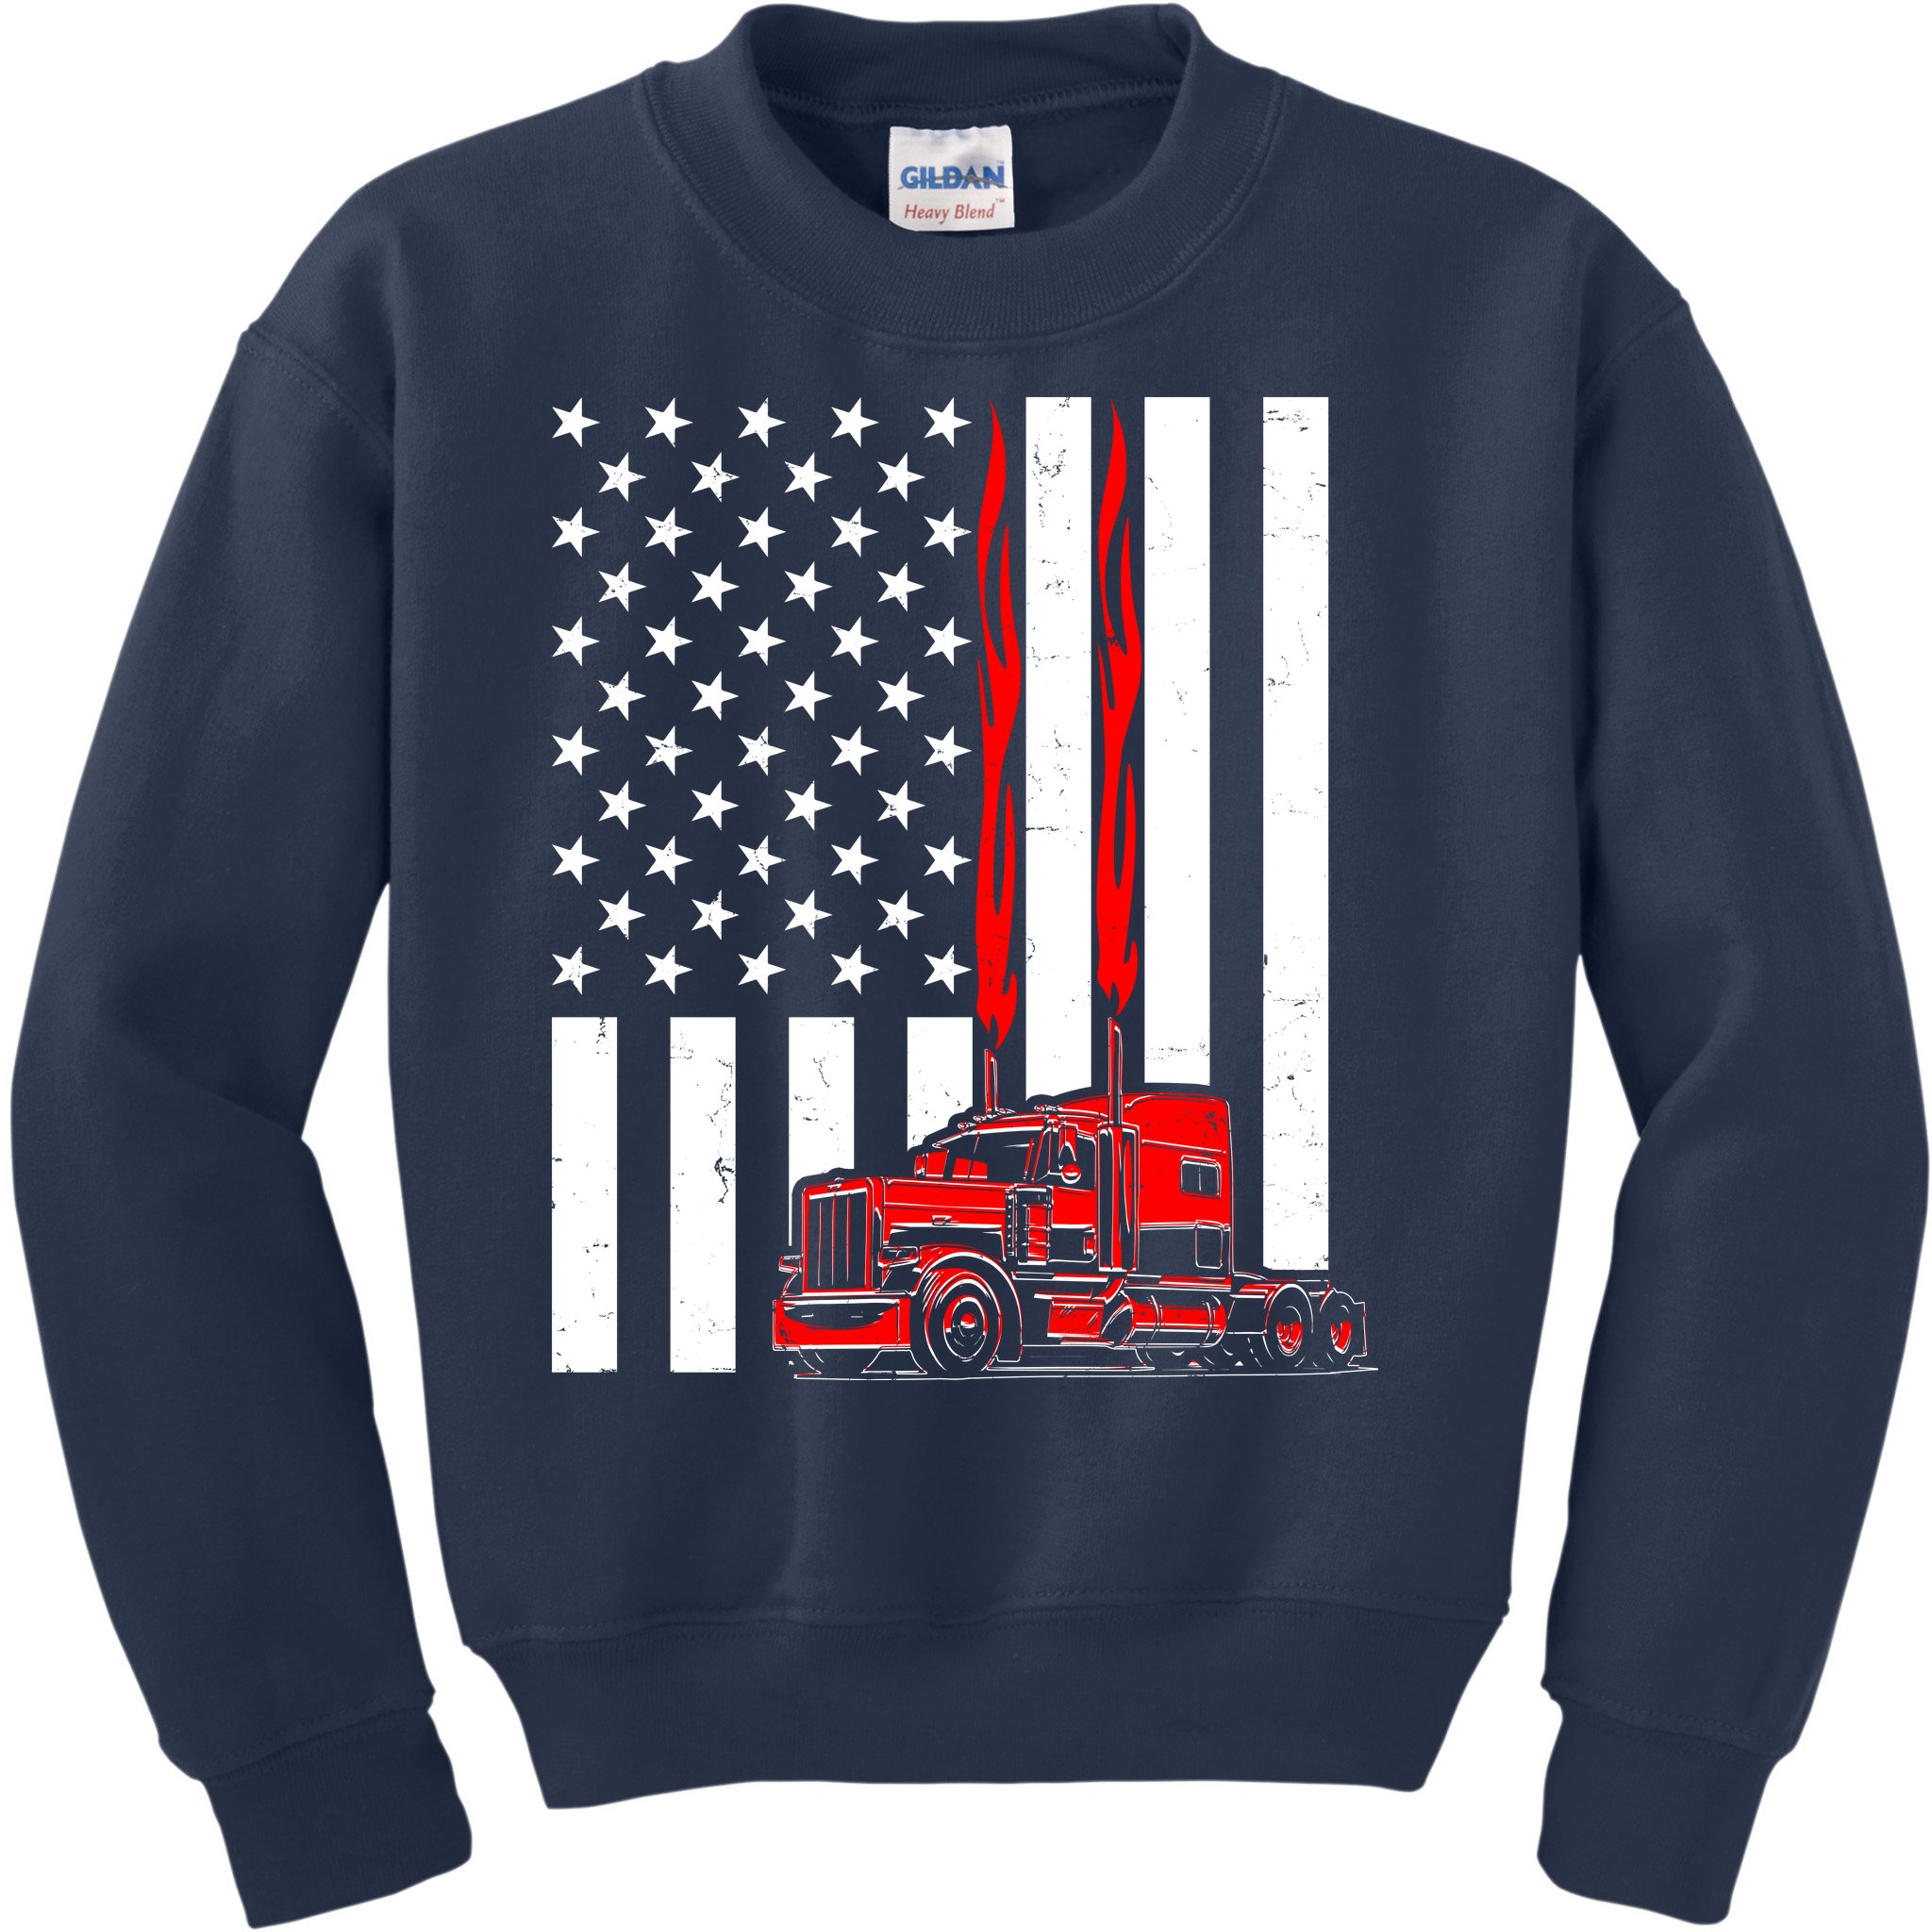 https://images3.teeshirtpalace.com/images/productImages/cts5737934-cool-trucker-semi-truck-flames-american-flag--navy-yas-garment.jpg